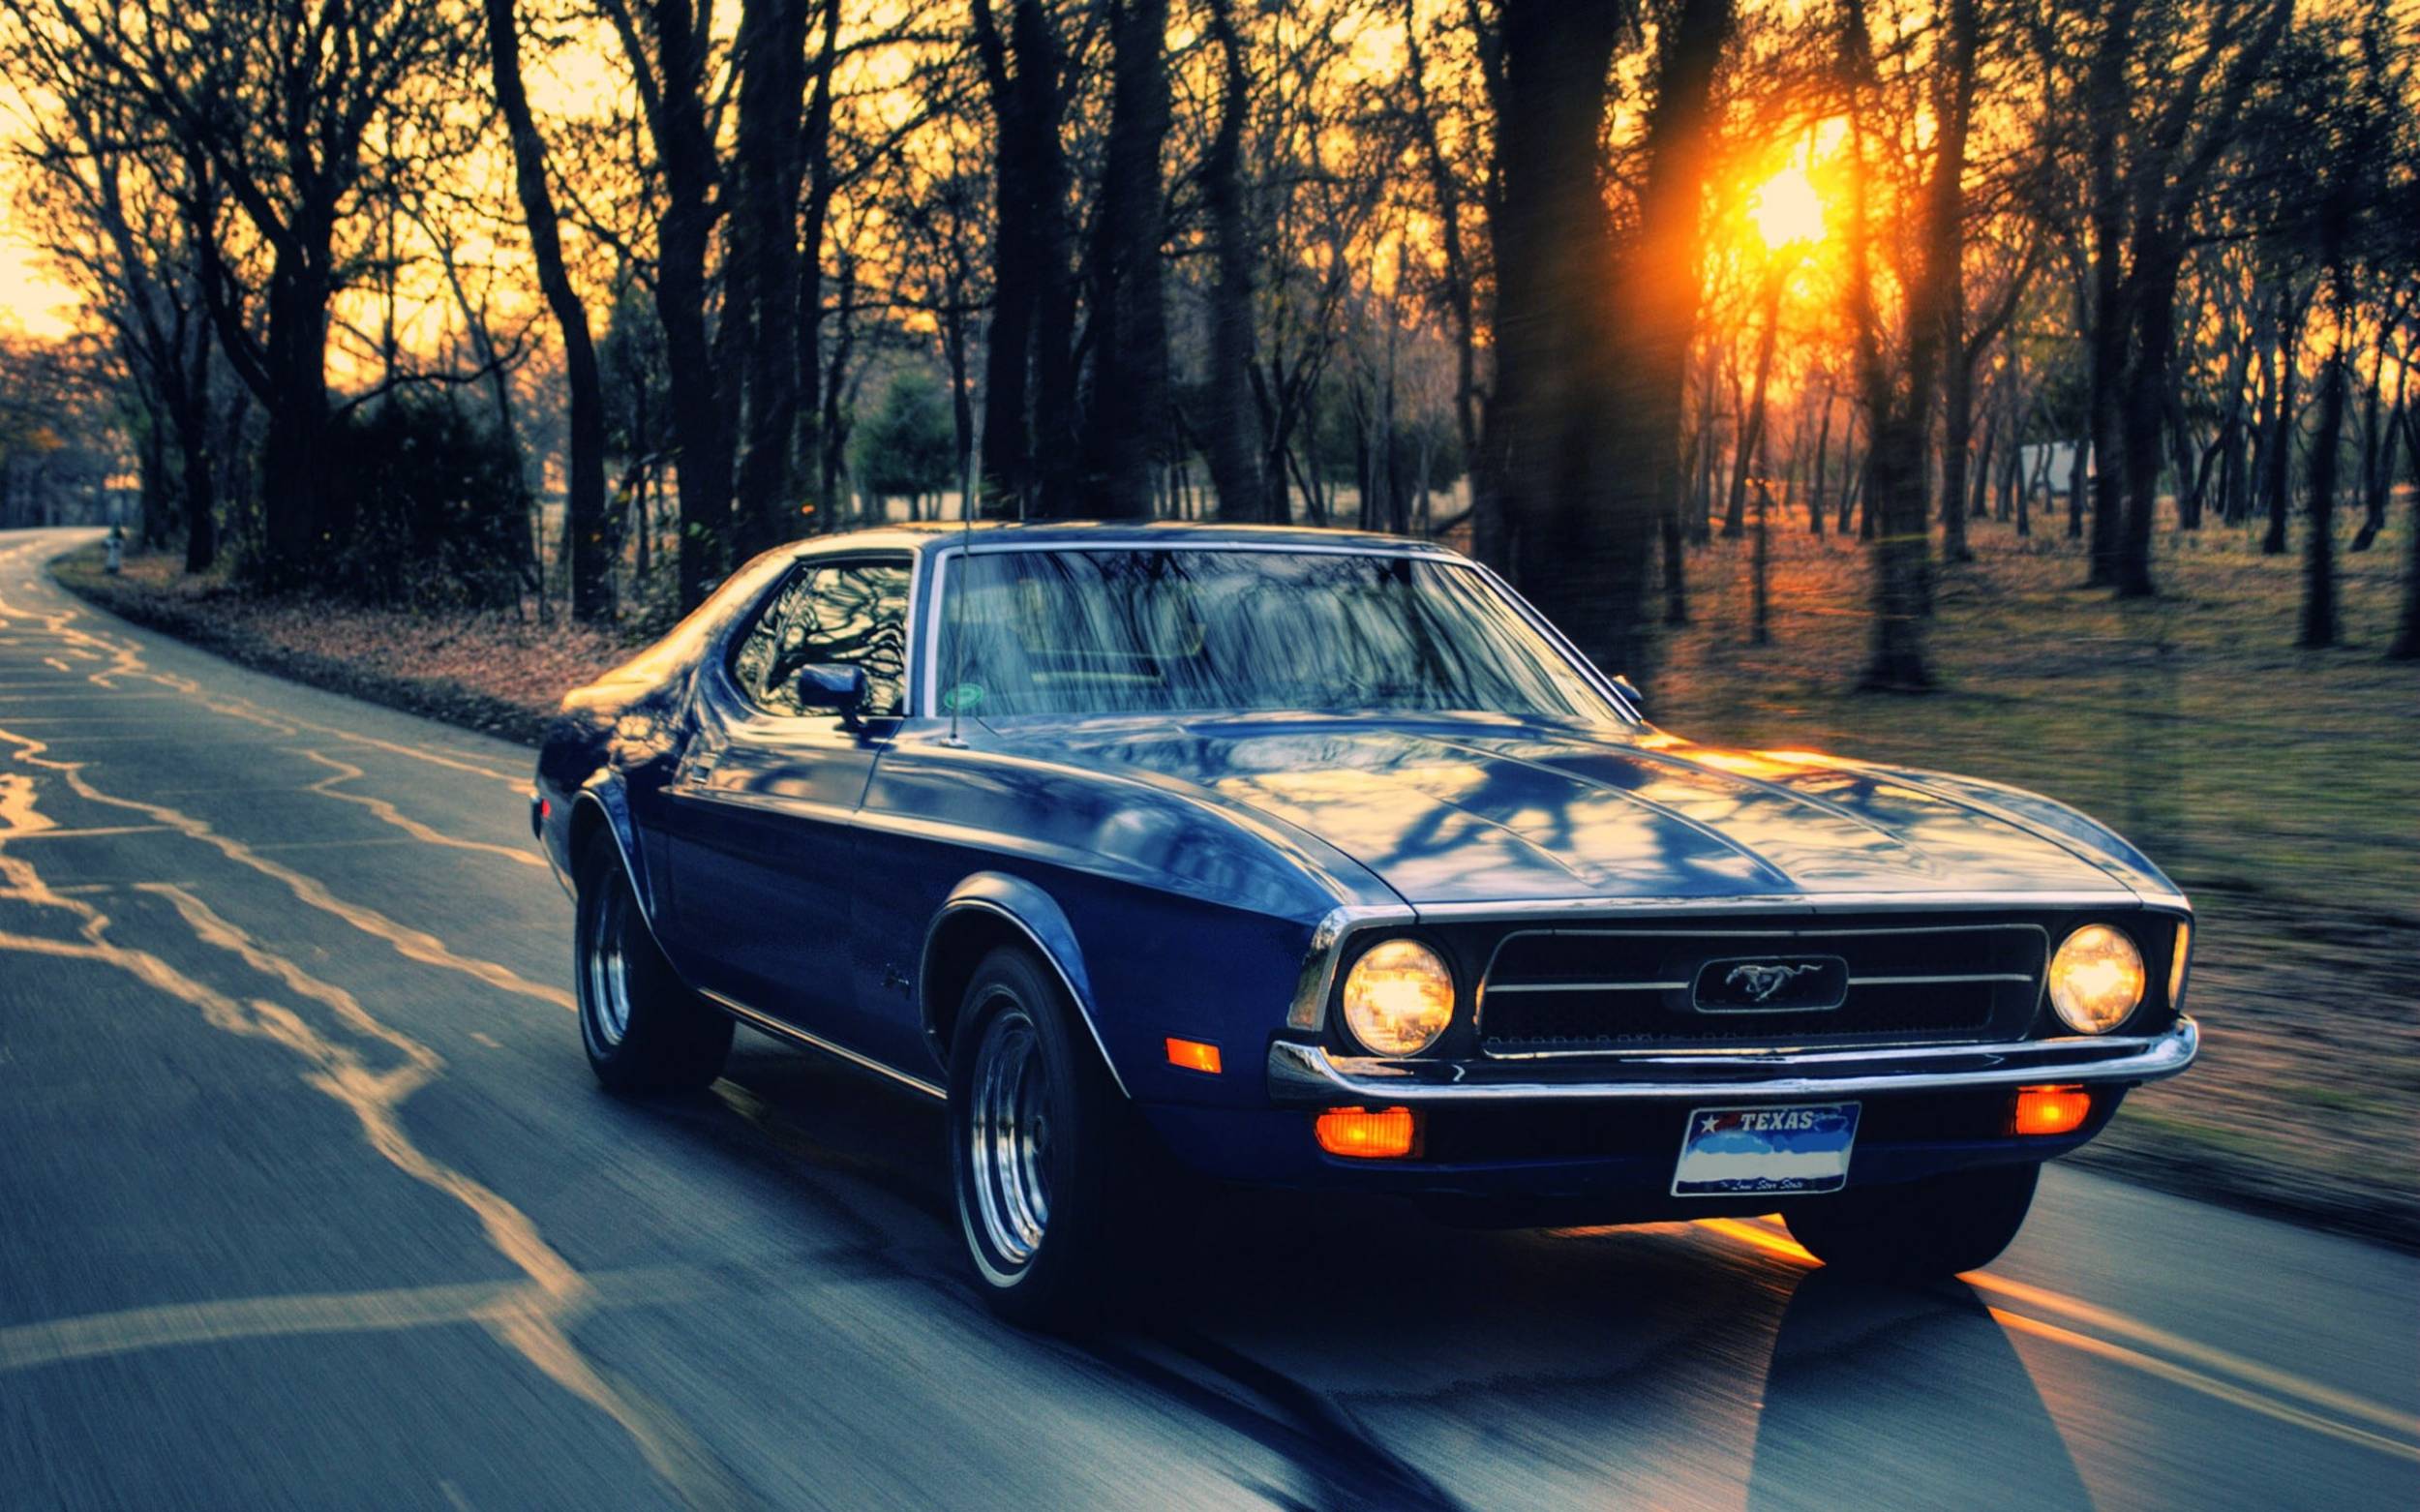 Best Mustang Wallpaper in High Quality, Burton Levine